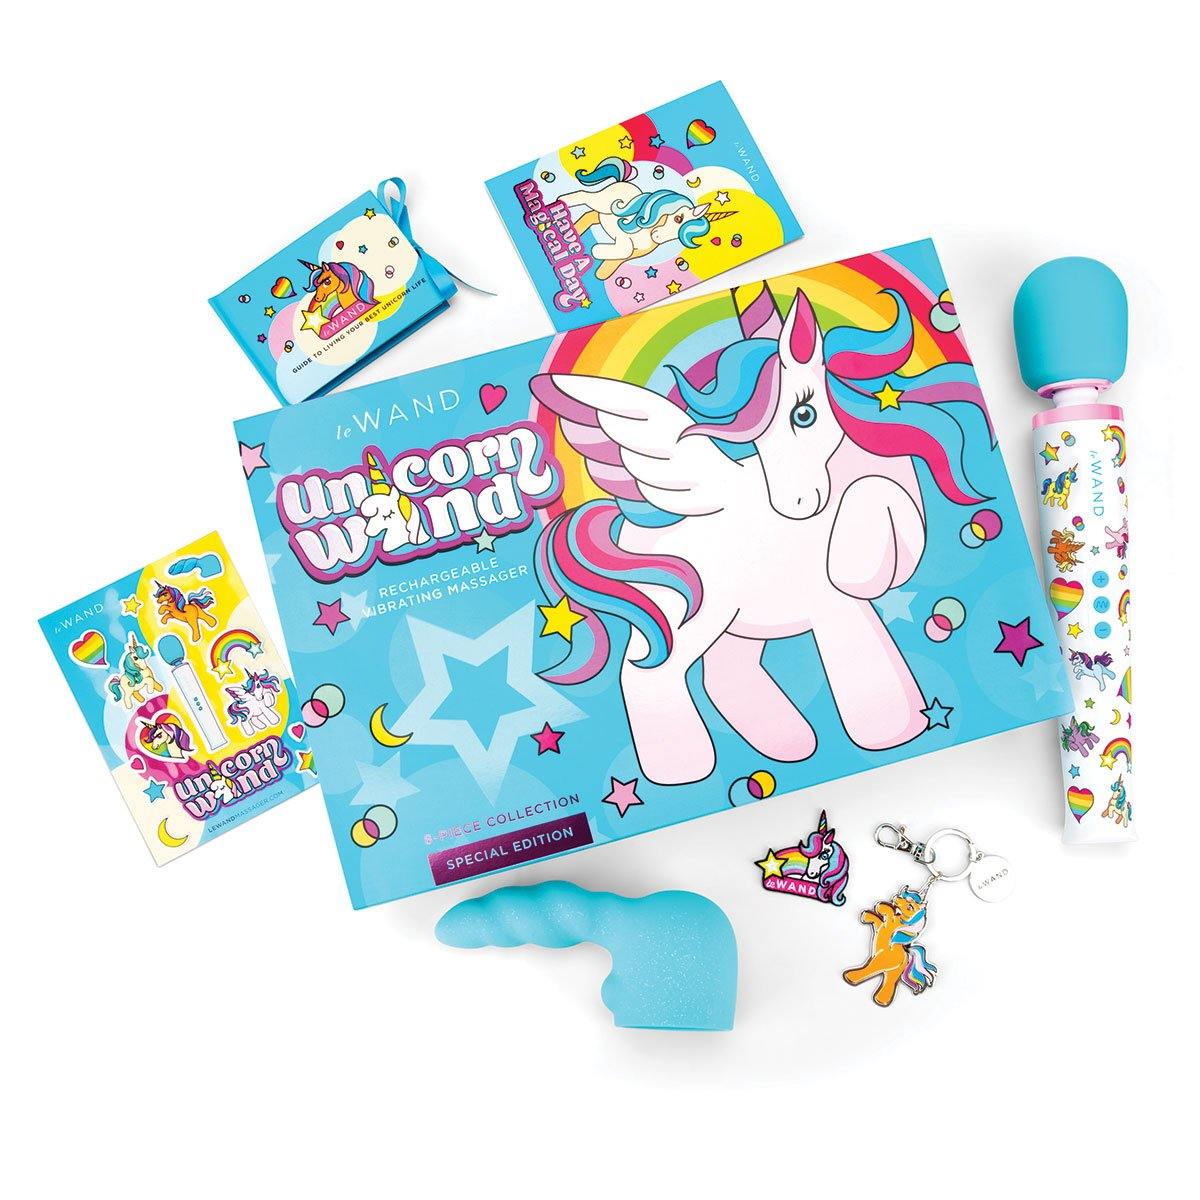 Le Wand Unicorn Wand 8pc Collection - Buy At Luxury Toy X - Free 3-Day Shipping